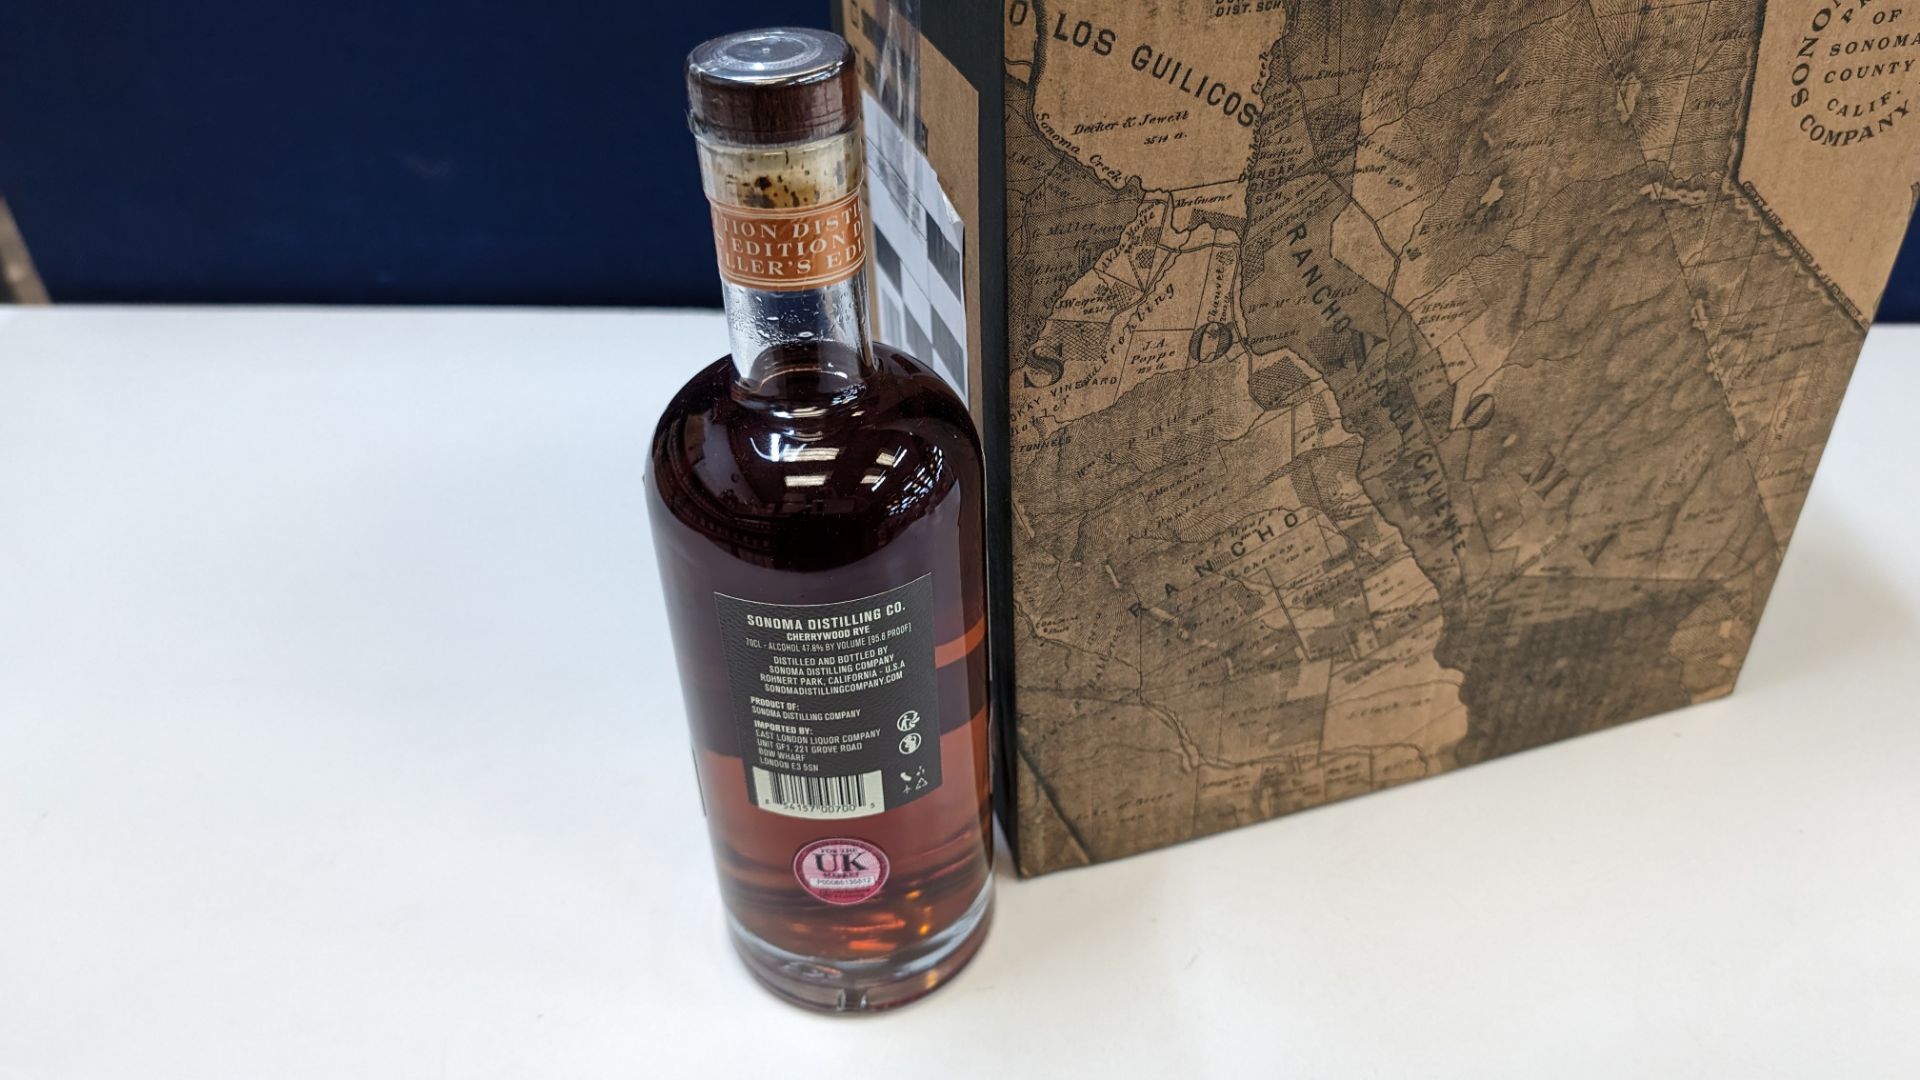 6 off 700ml bottles of Sonoma Cherrywood Rye Whiskey. In Sonoma branded box which includes bottling - Image 6 of 7